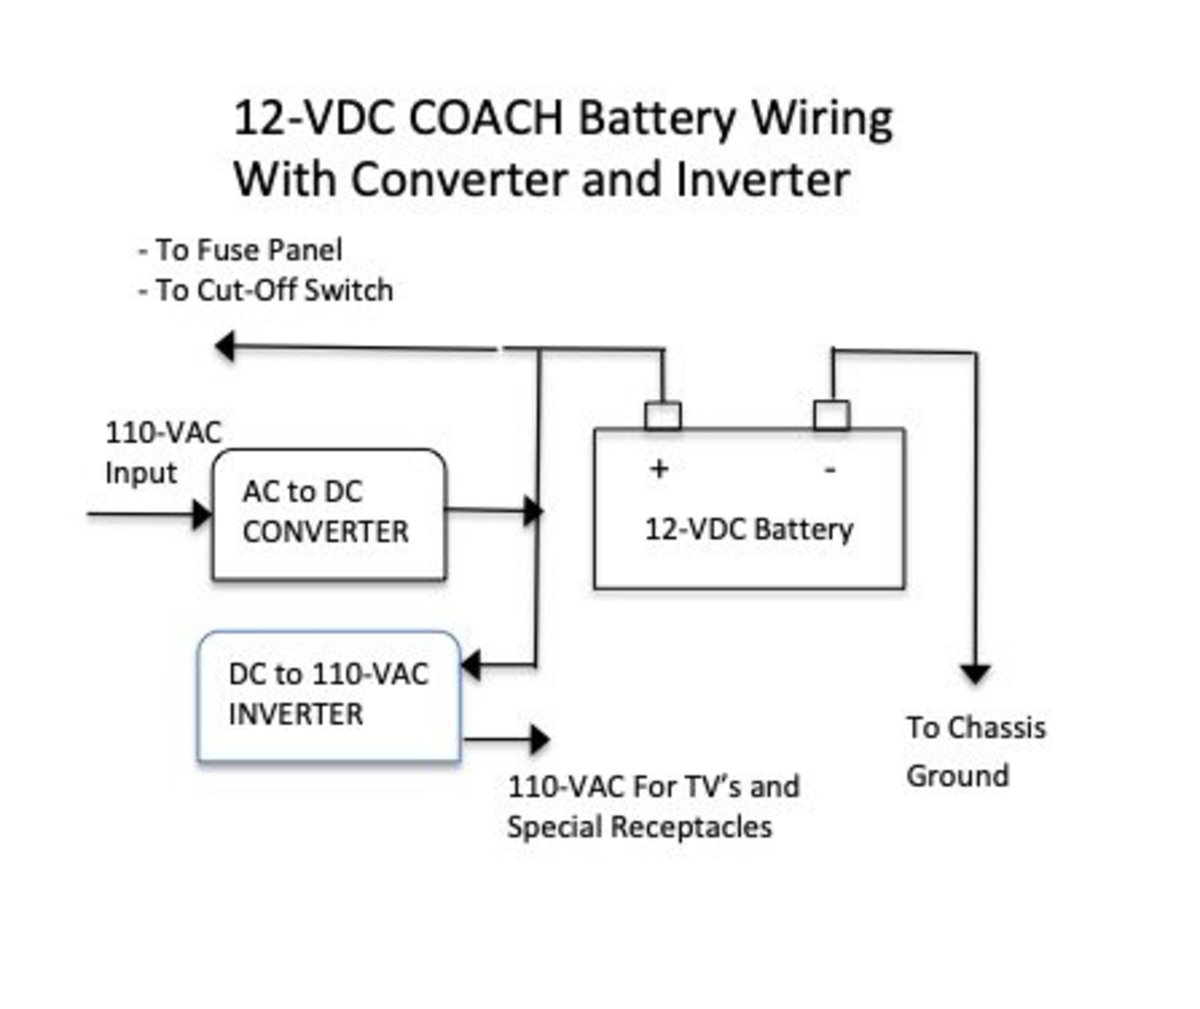 RV Inverters and Converters: How They Keep Your Camper Equipment